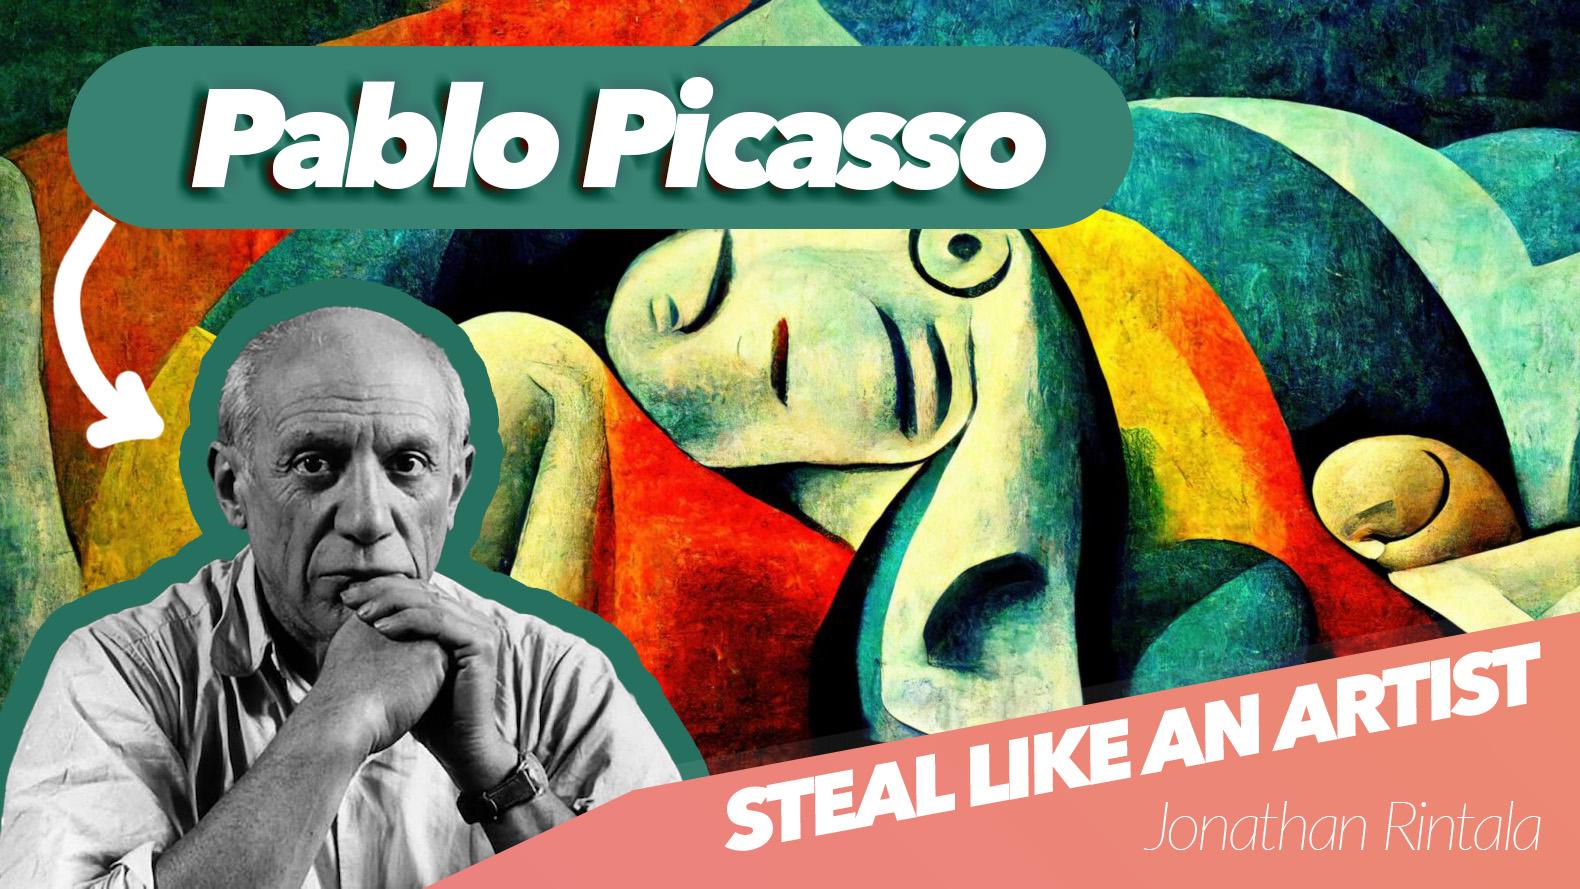 Steal like an artist - Pablo Picasso